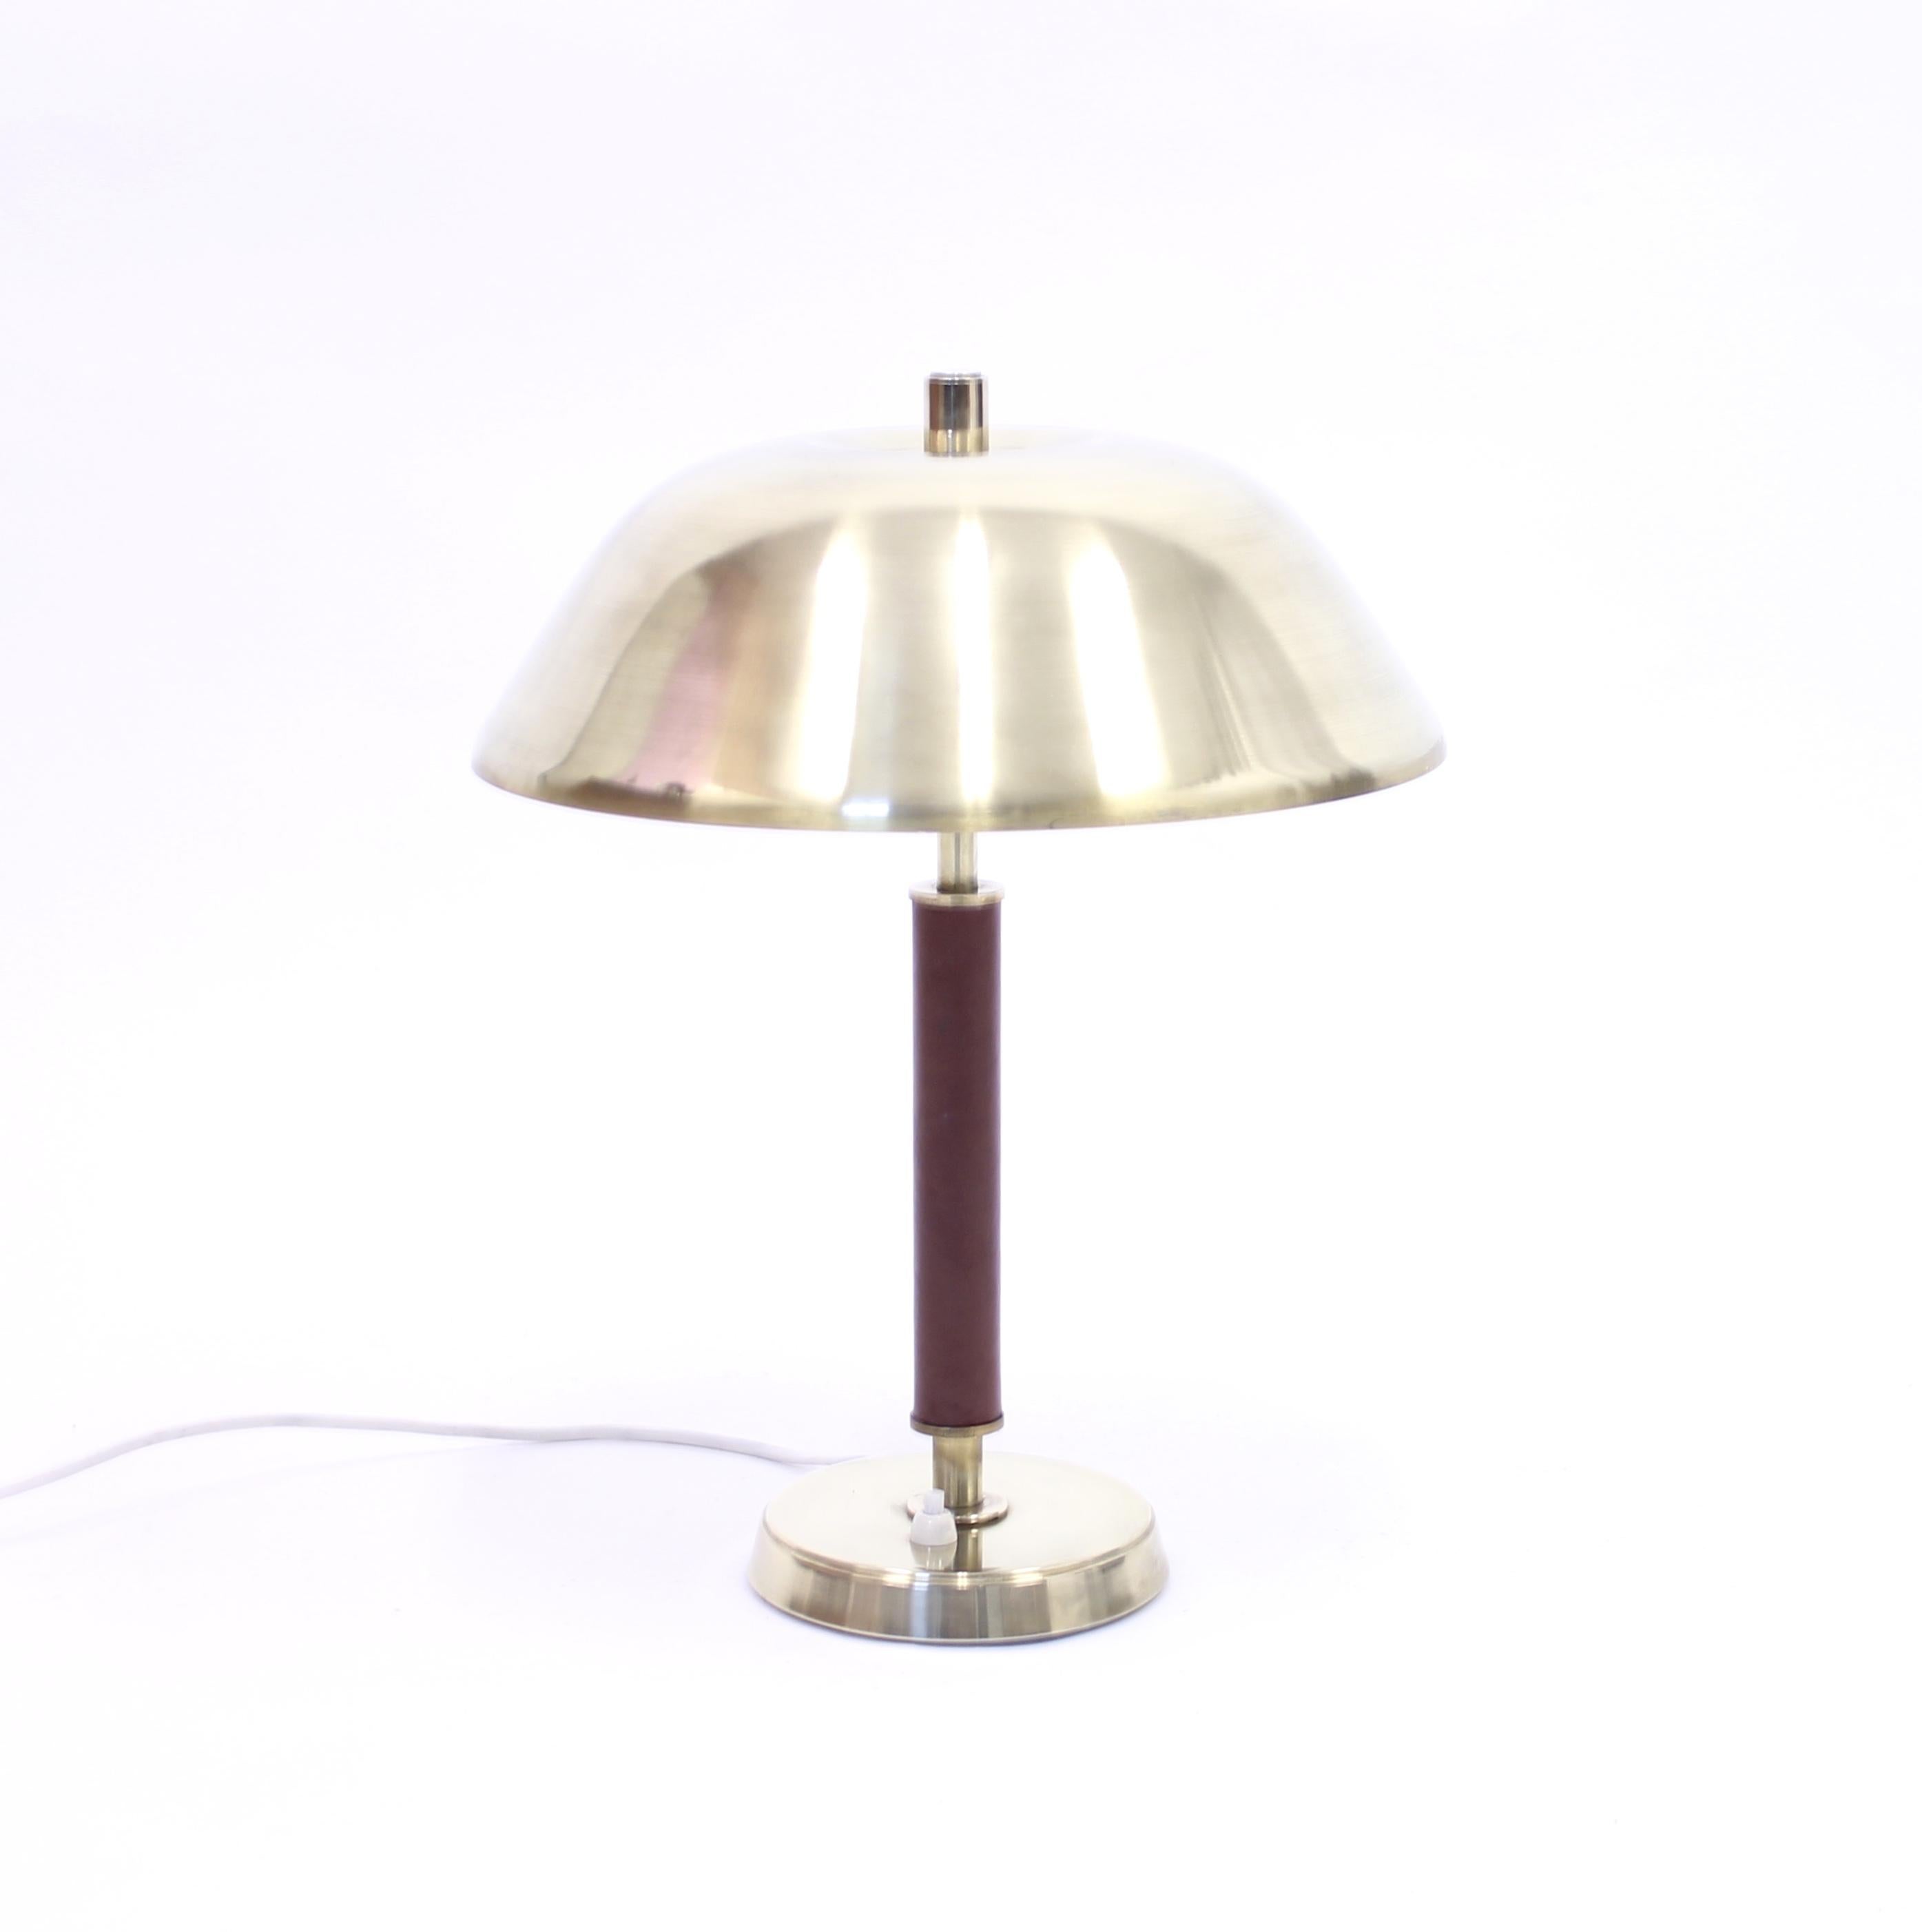 Brass table lamp with leather clad stem manufactured by Swedish firm Falkenbergs Belysning in the 1960s. Marked with sticker under the base. Very good condition with minor ware.